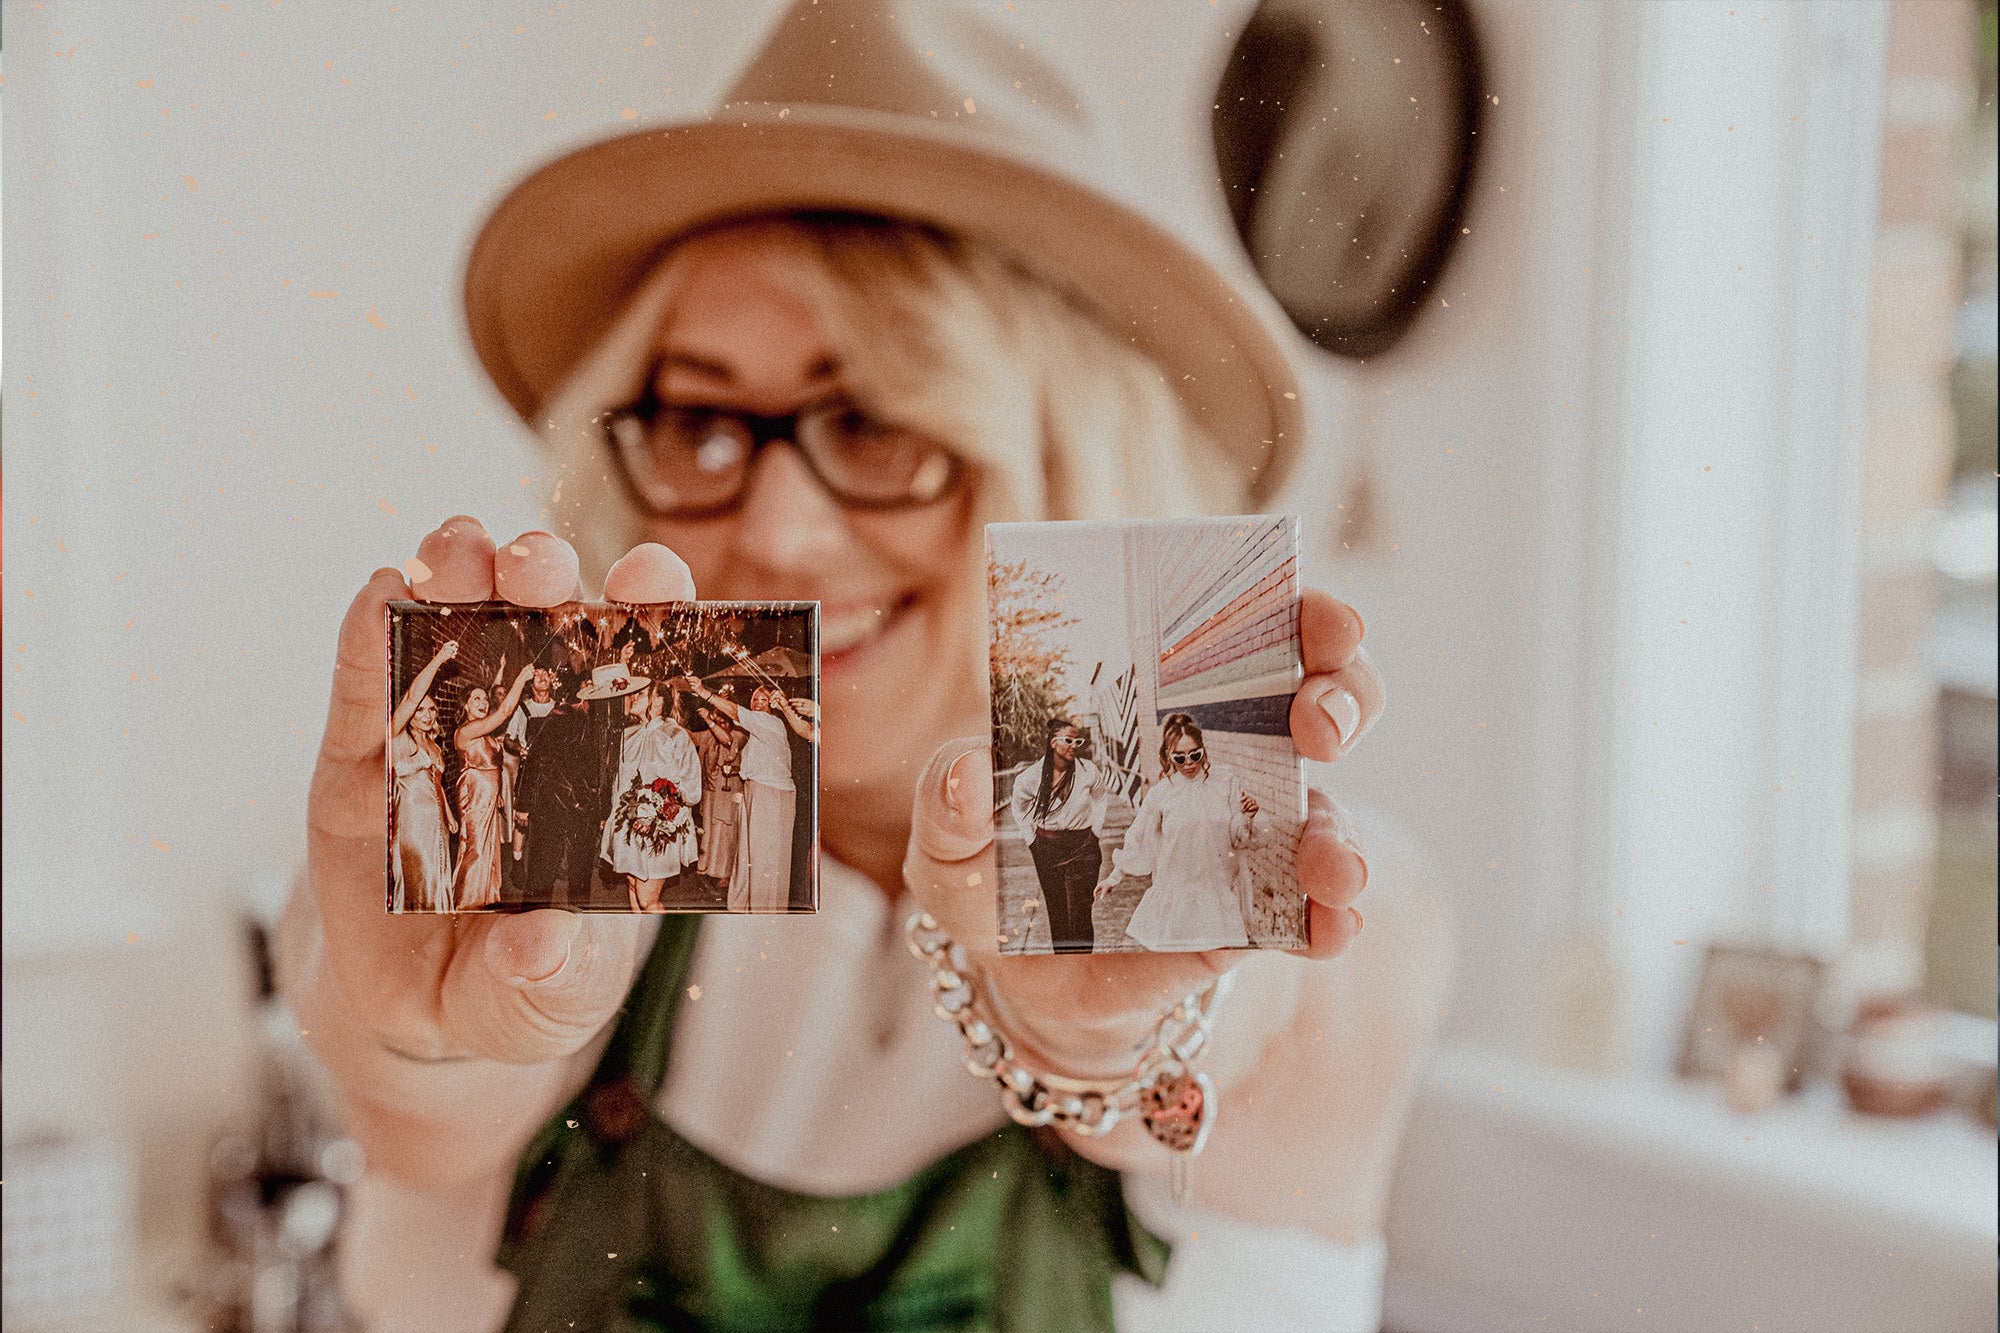 Founder of Urban Magnet Co, Mel, holding up two customised magnets printed with wedding photos.